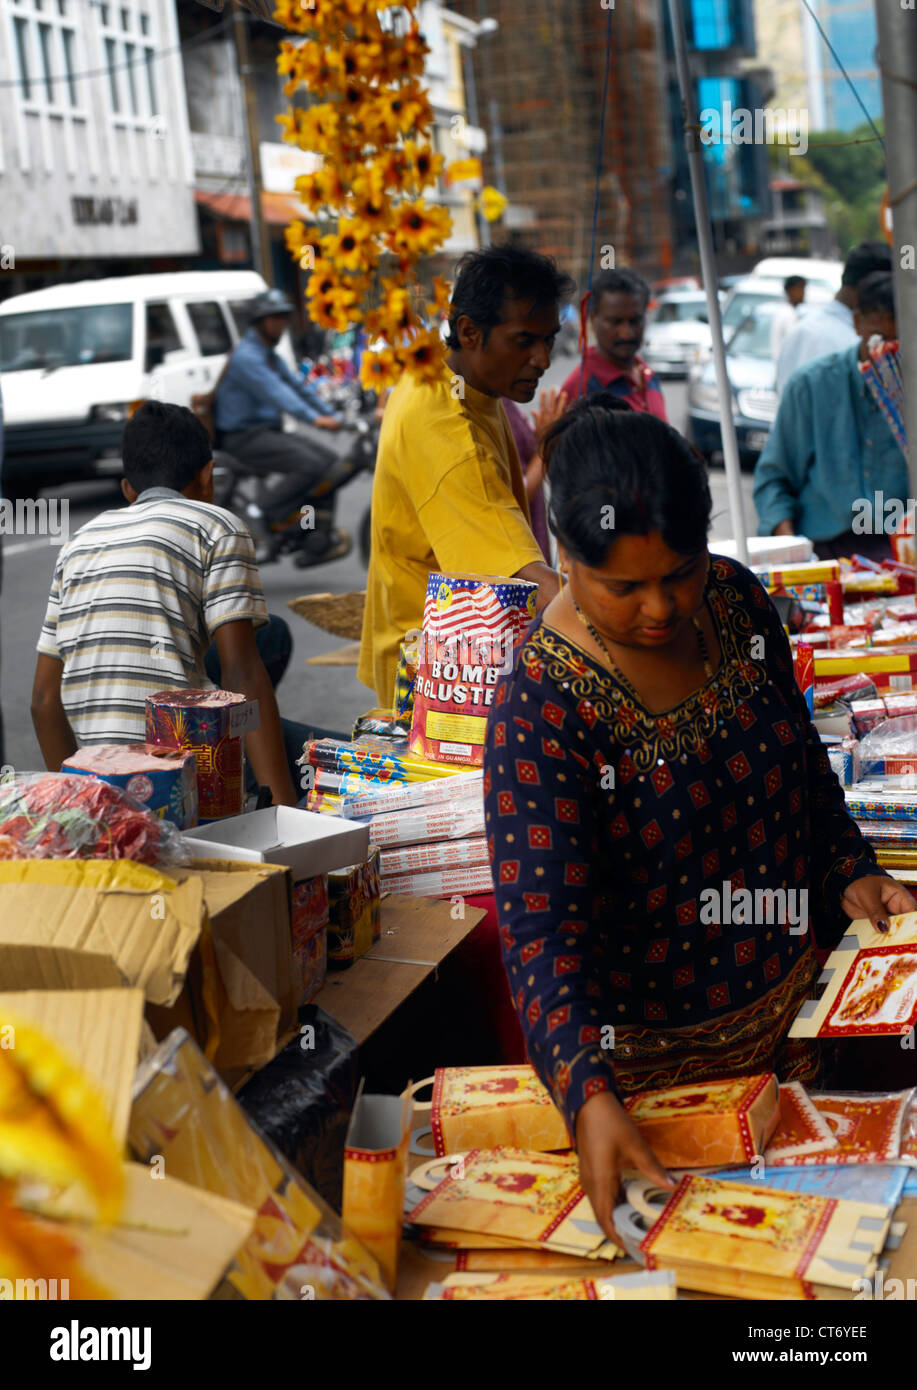 Port Louis Mauritius Diwali Market Stall Selling Fireworks and Cards Stock Photo